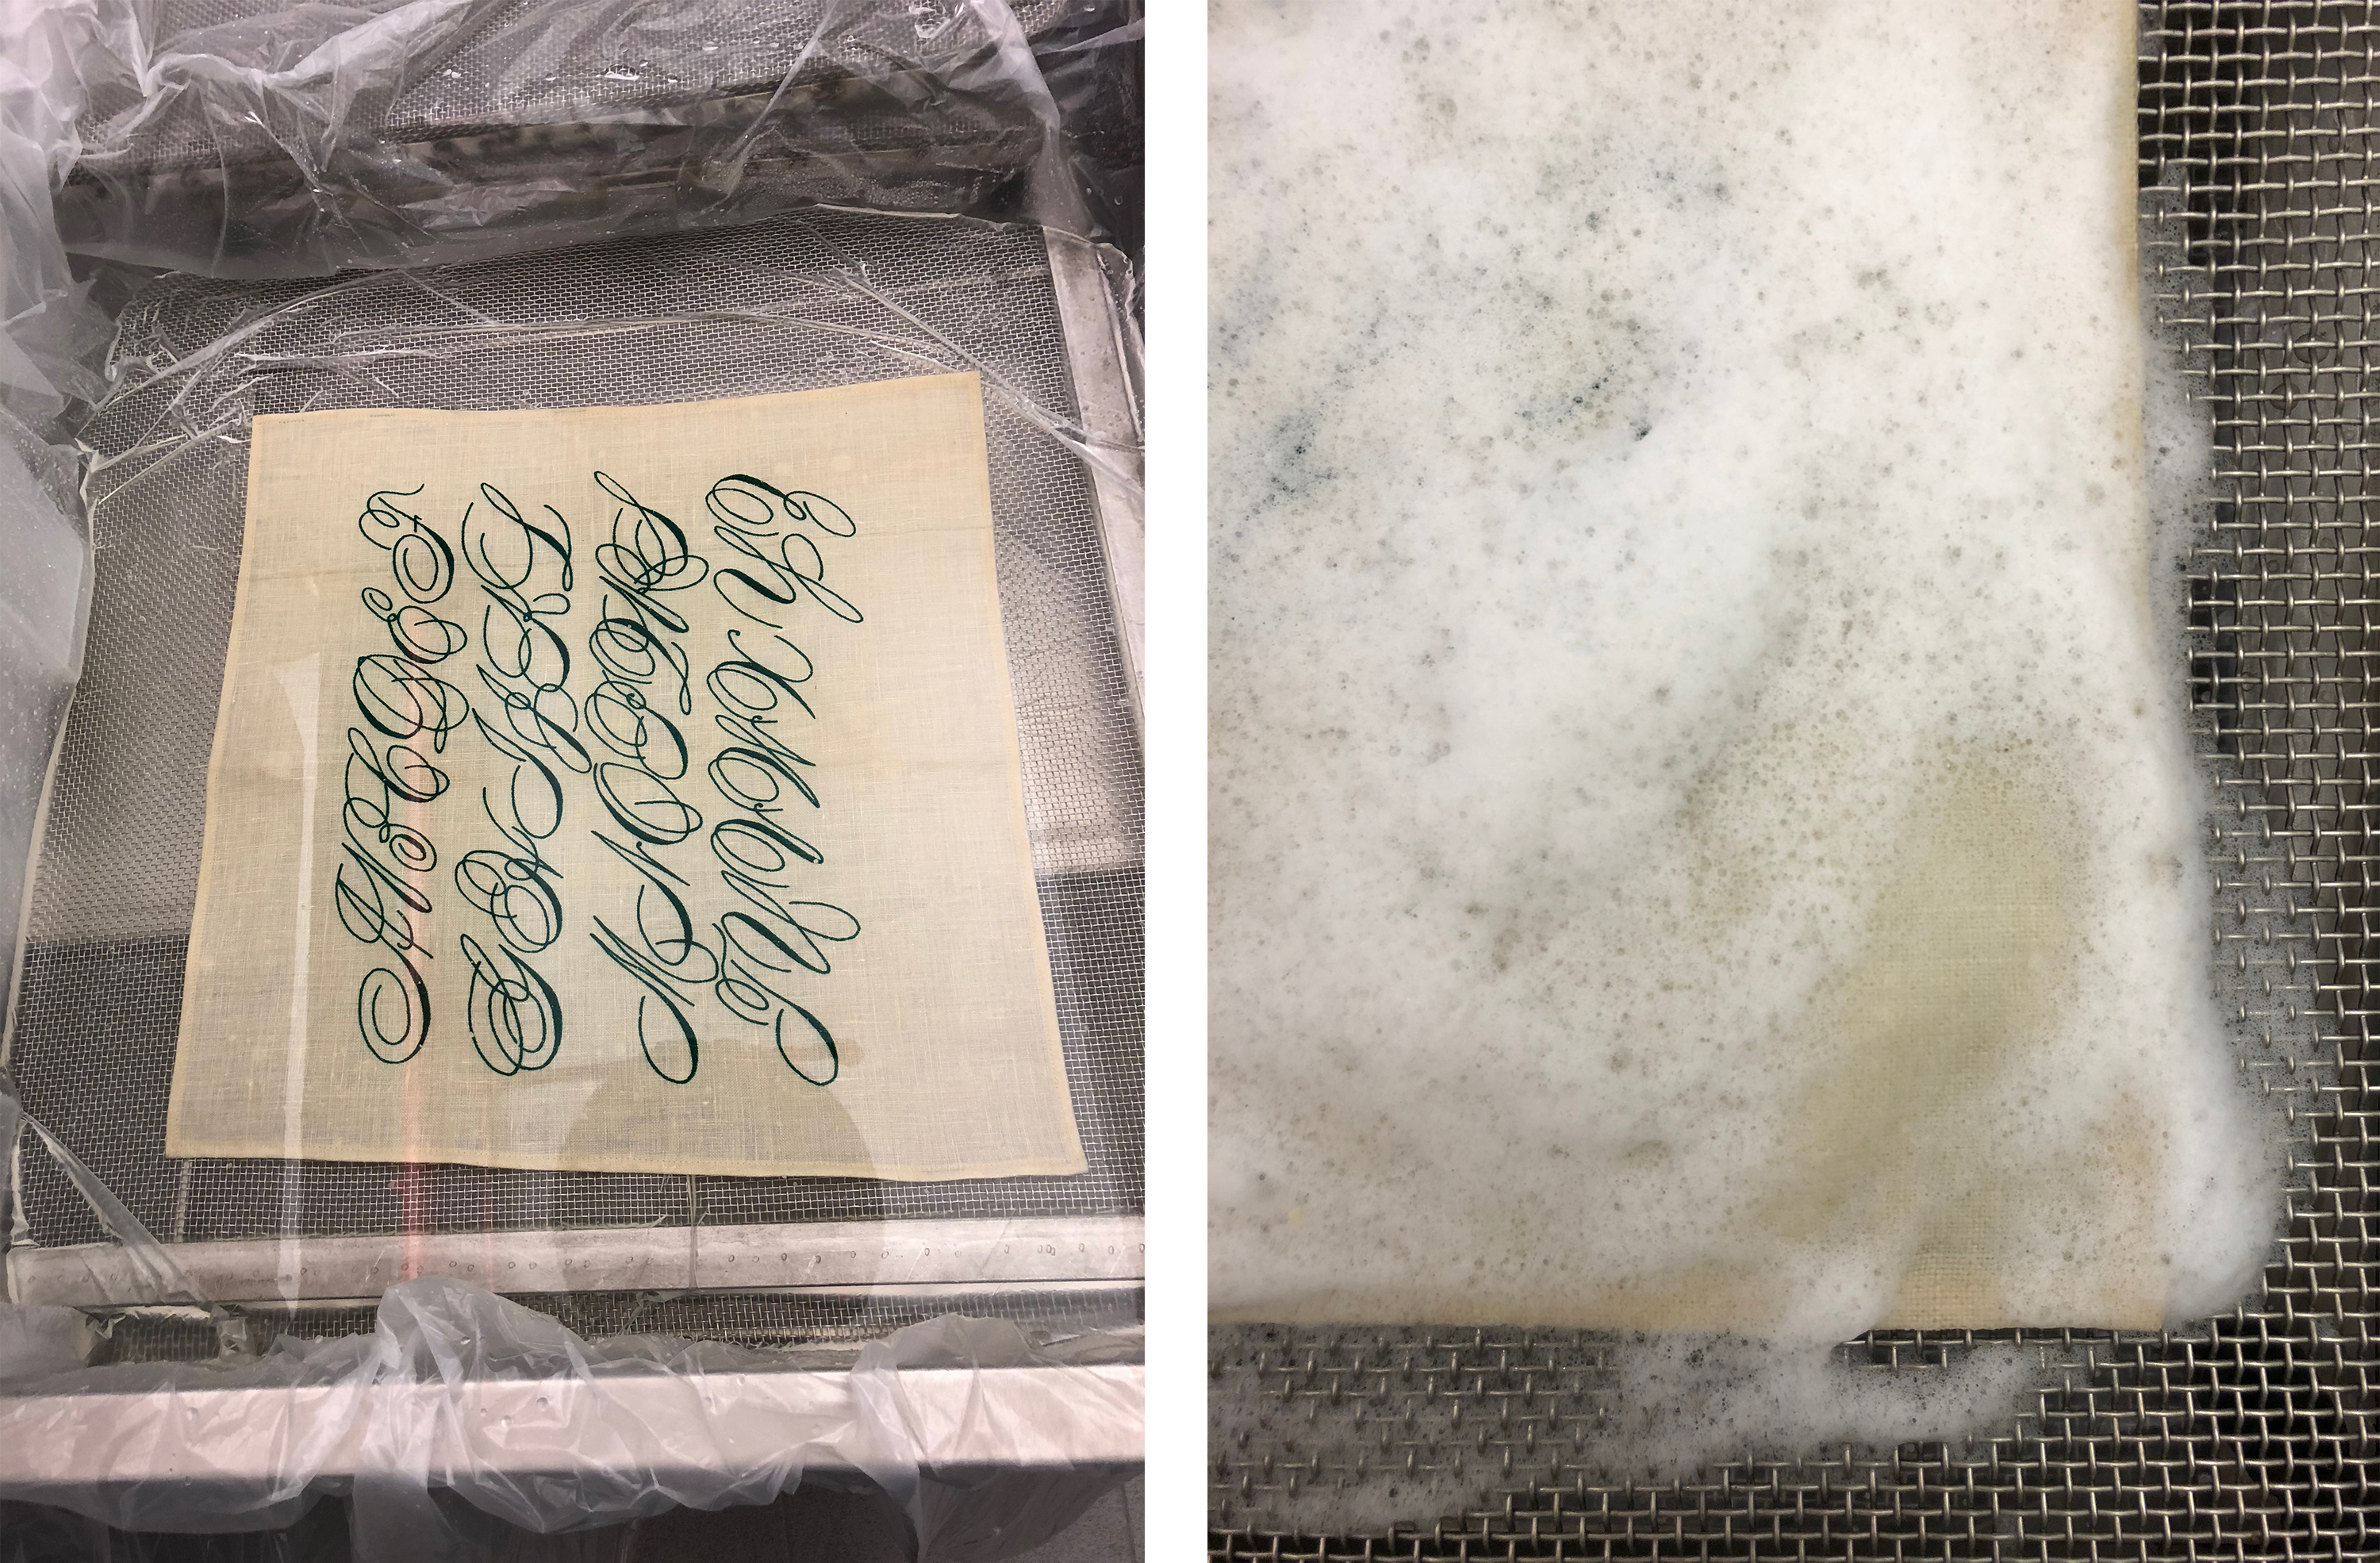 Composite image of two photographs of a square of textile being cleaned with water and detergent.